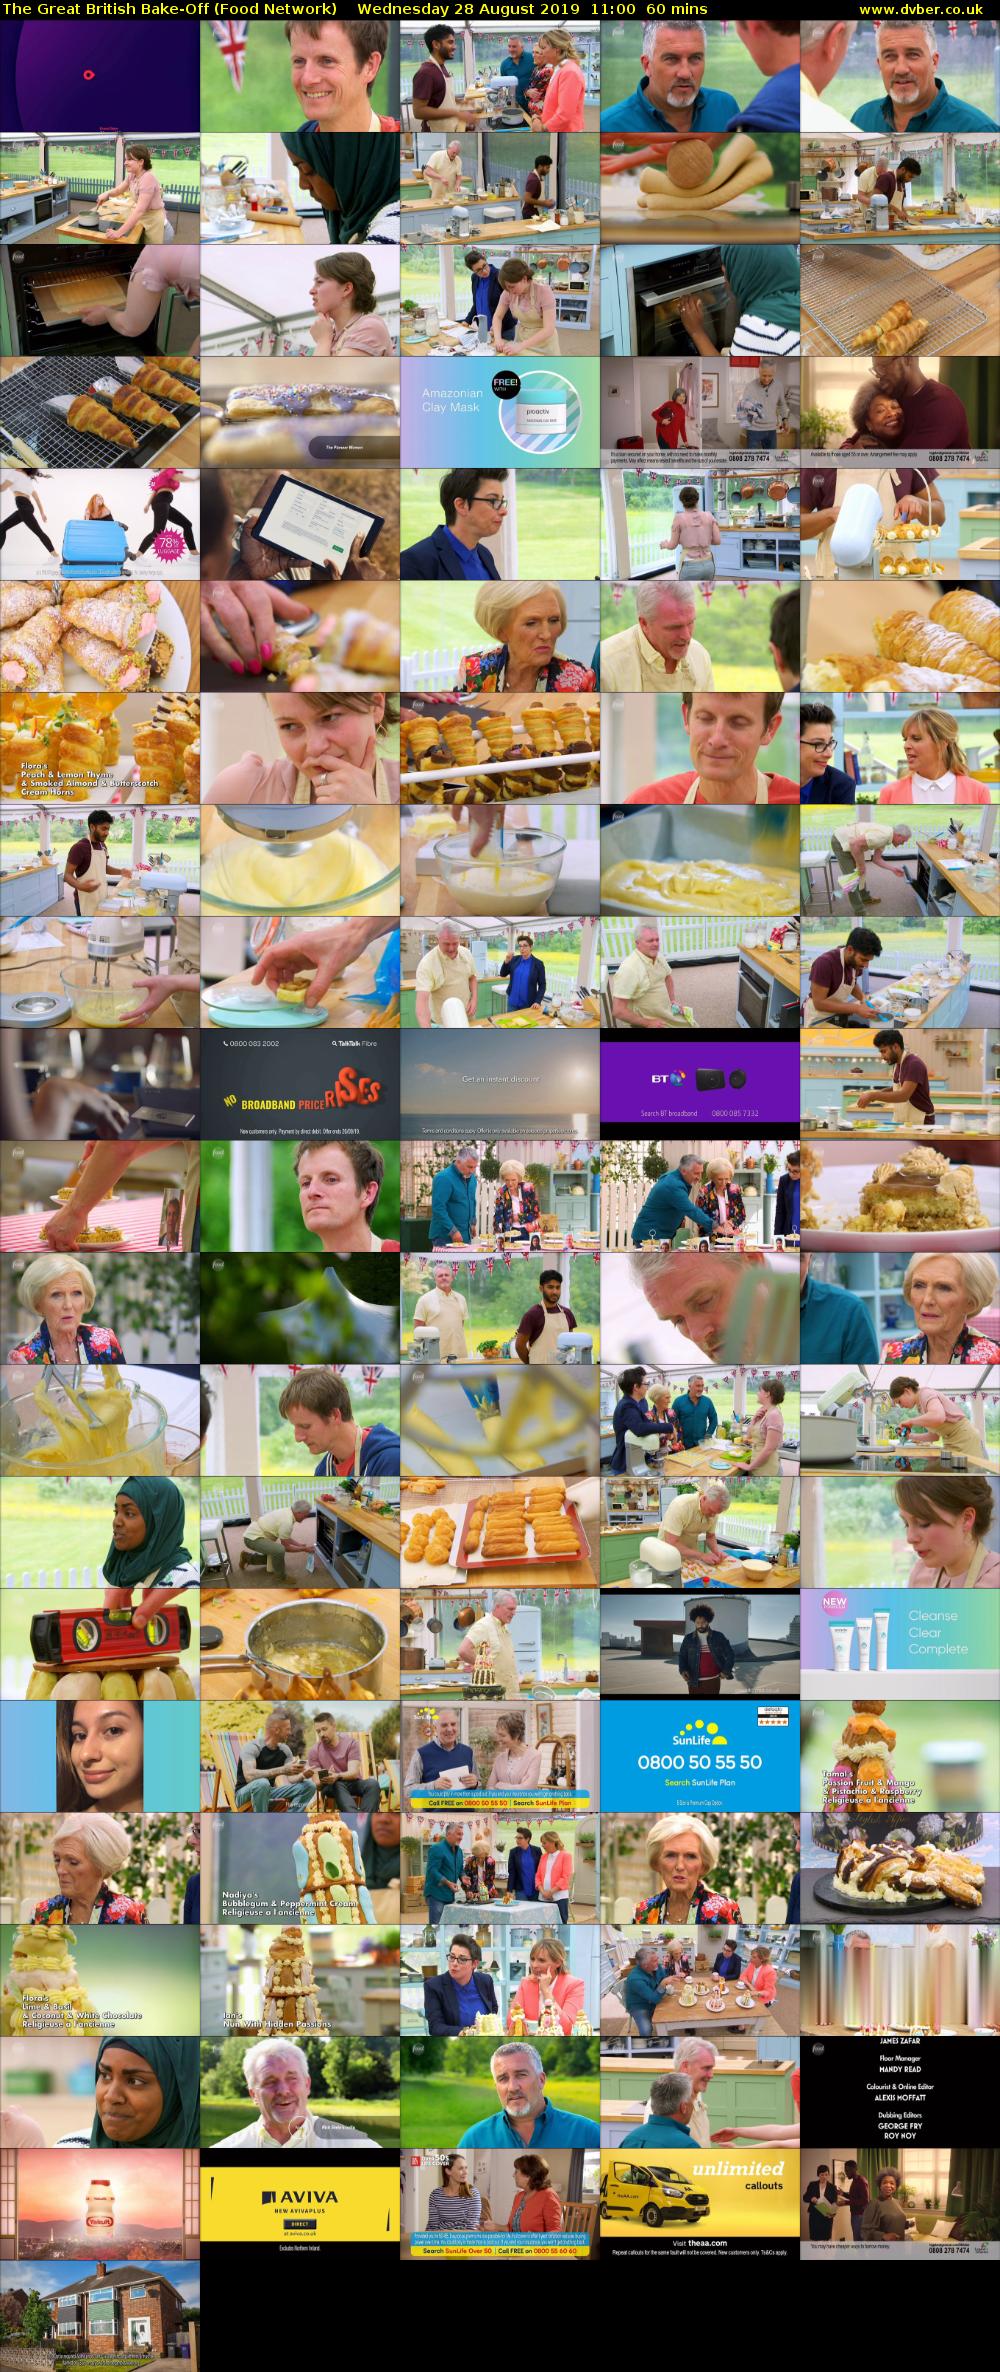 The Great British Bake-Off (Food Network) Wednesday 28 August 2019 11:00 - 12:00